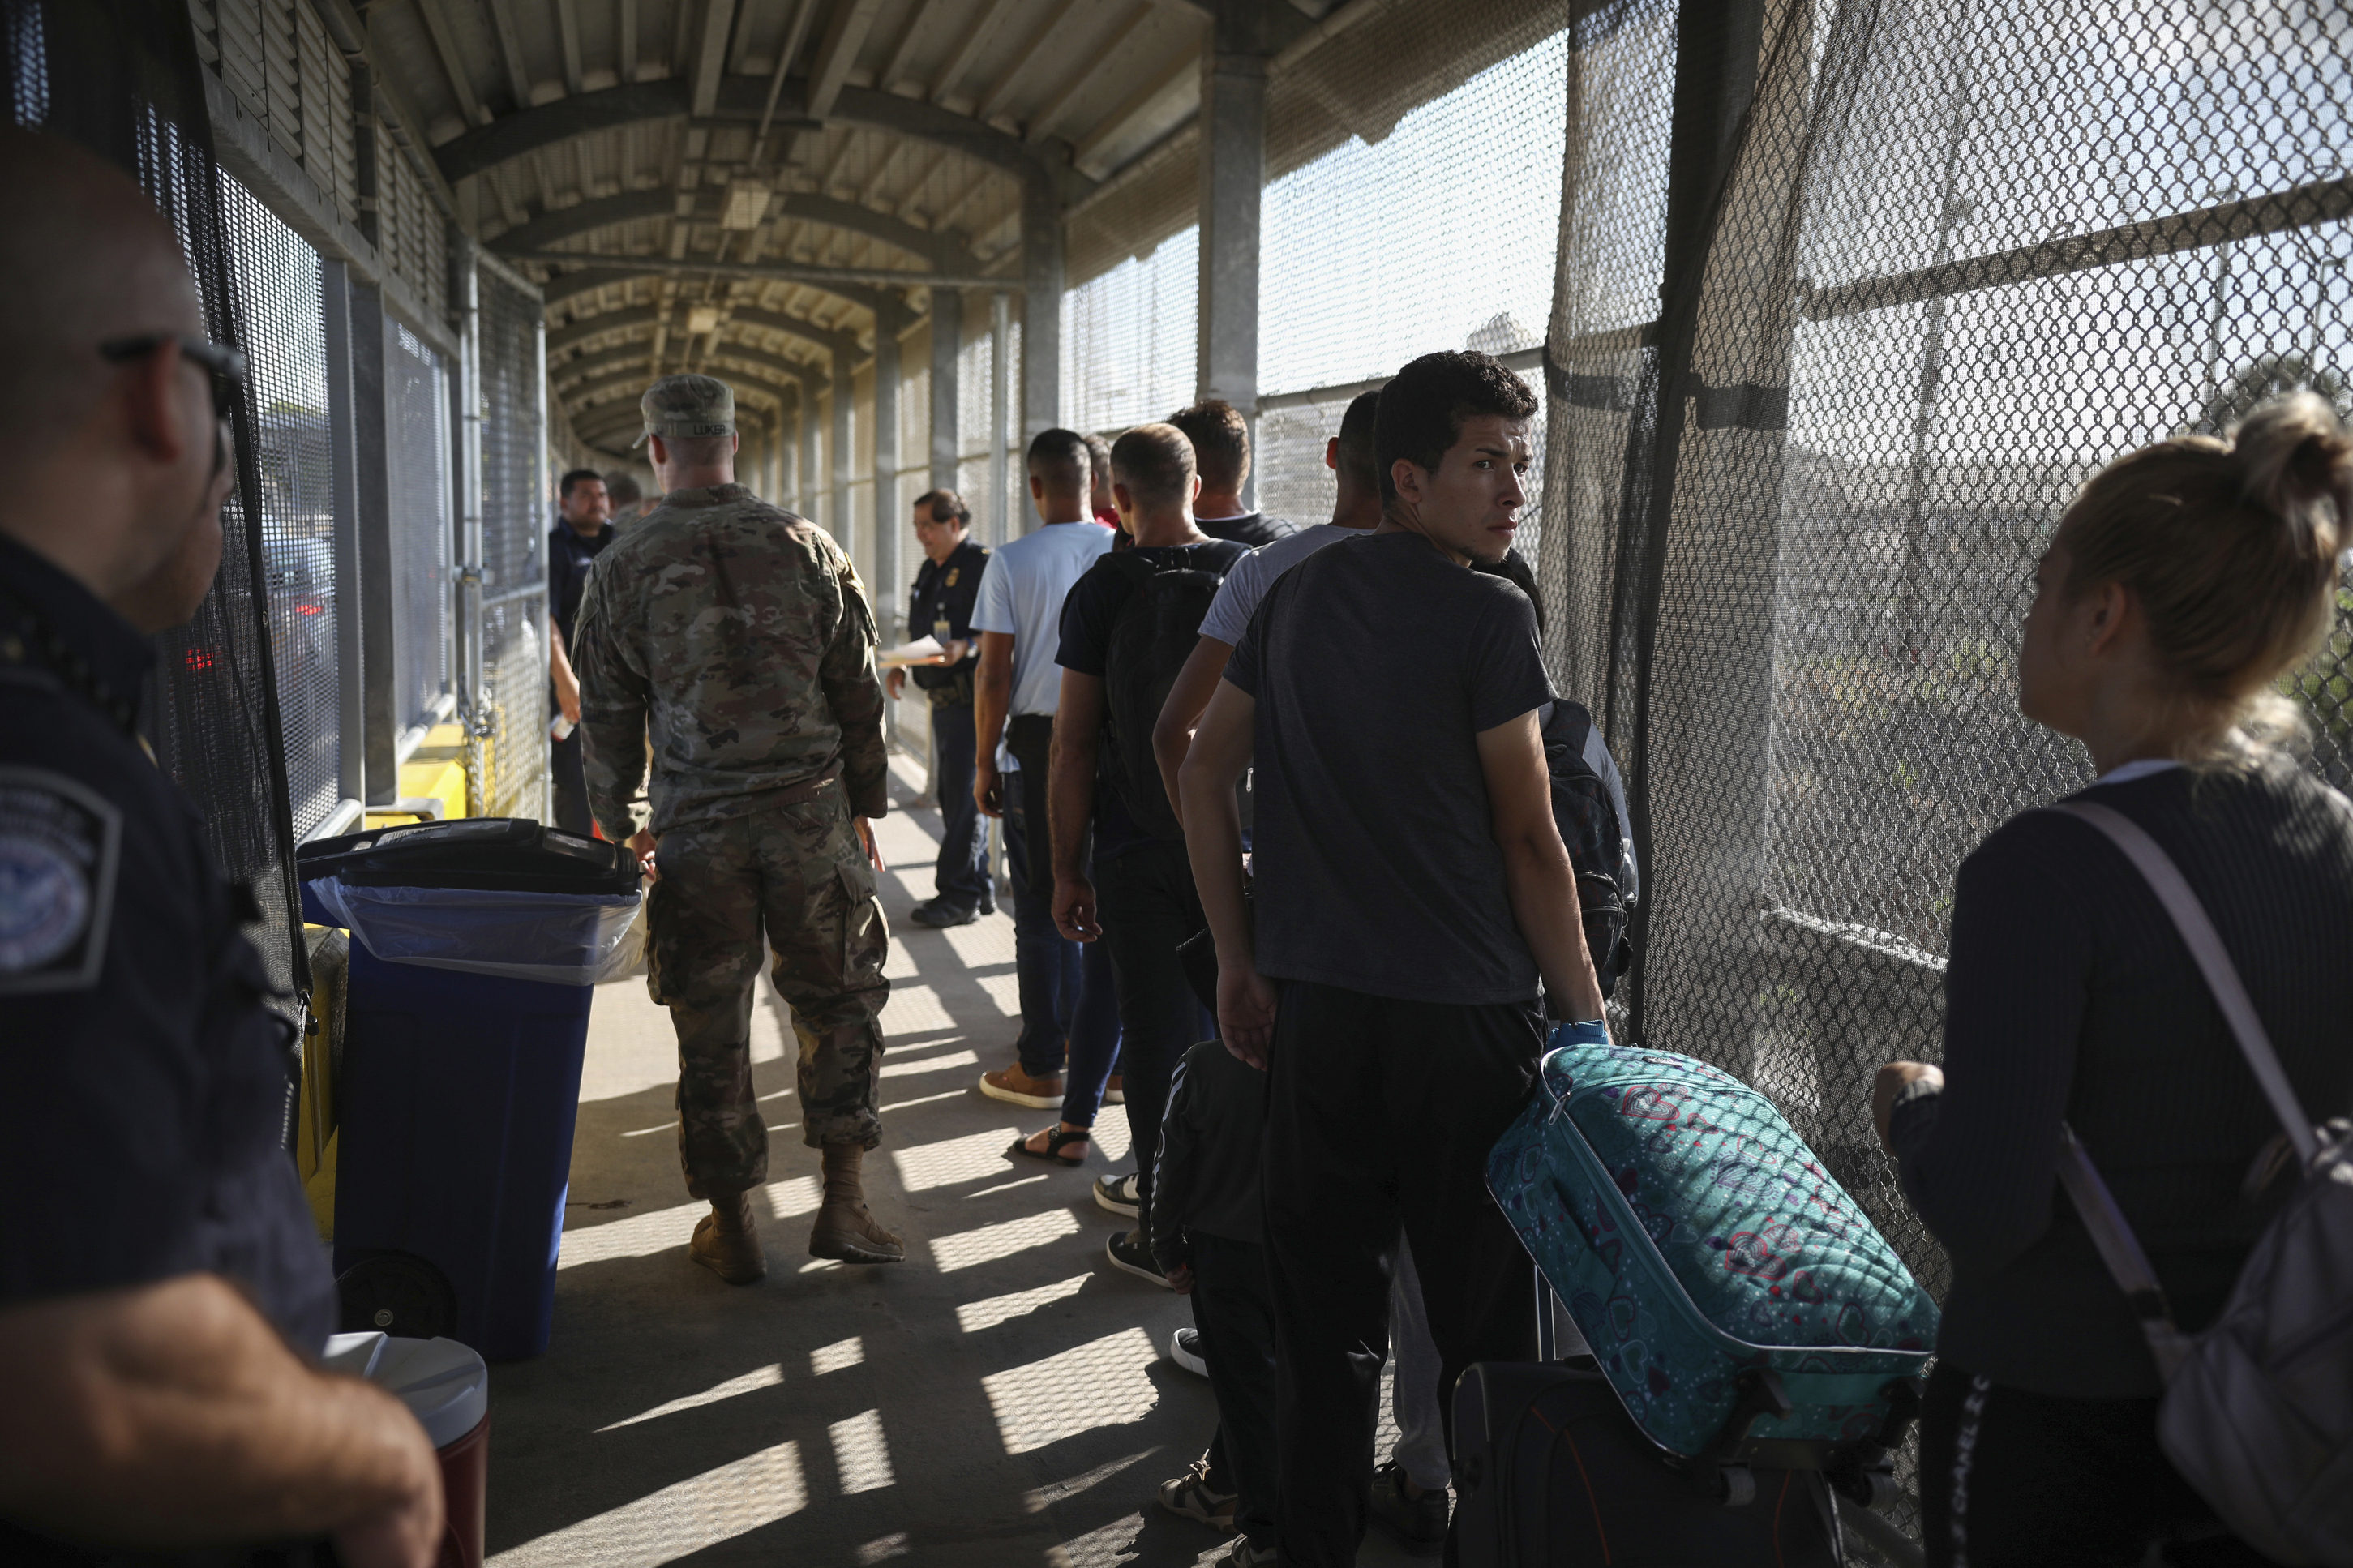 CORRECTS DATE - Migrants line up on their way to request asylum in the U.S., at the foot of the Puerta Mexico bridge that crosses to Brownsville, Texas, into Matamoros, Mexico, Friday, Aug. 2, 2019. (AP Photo/Emilio Espejel)